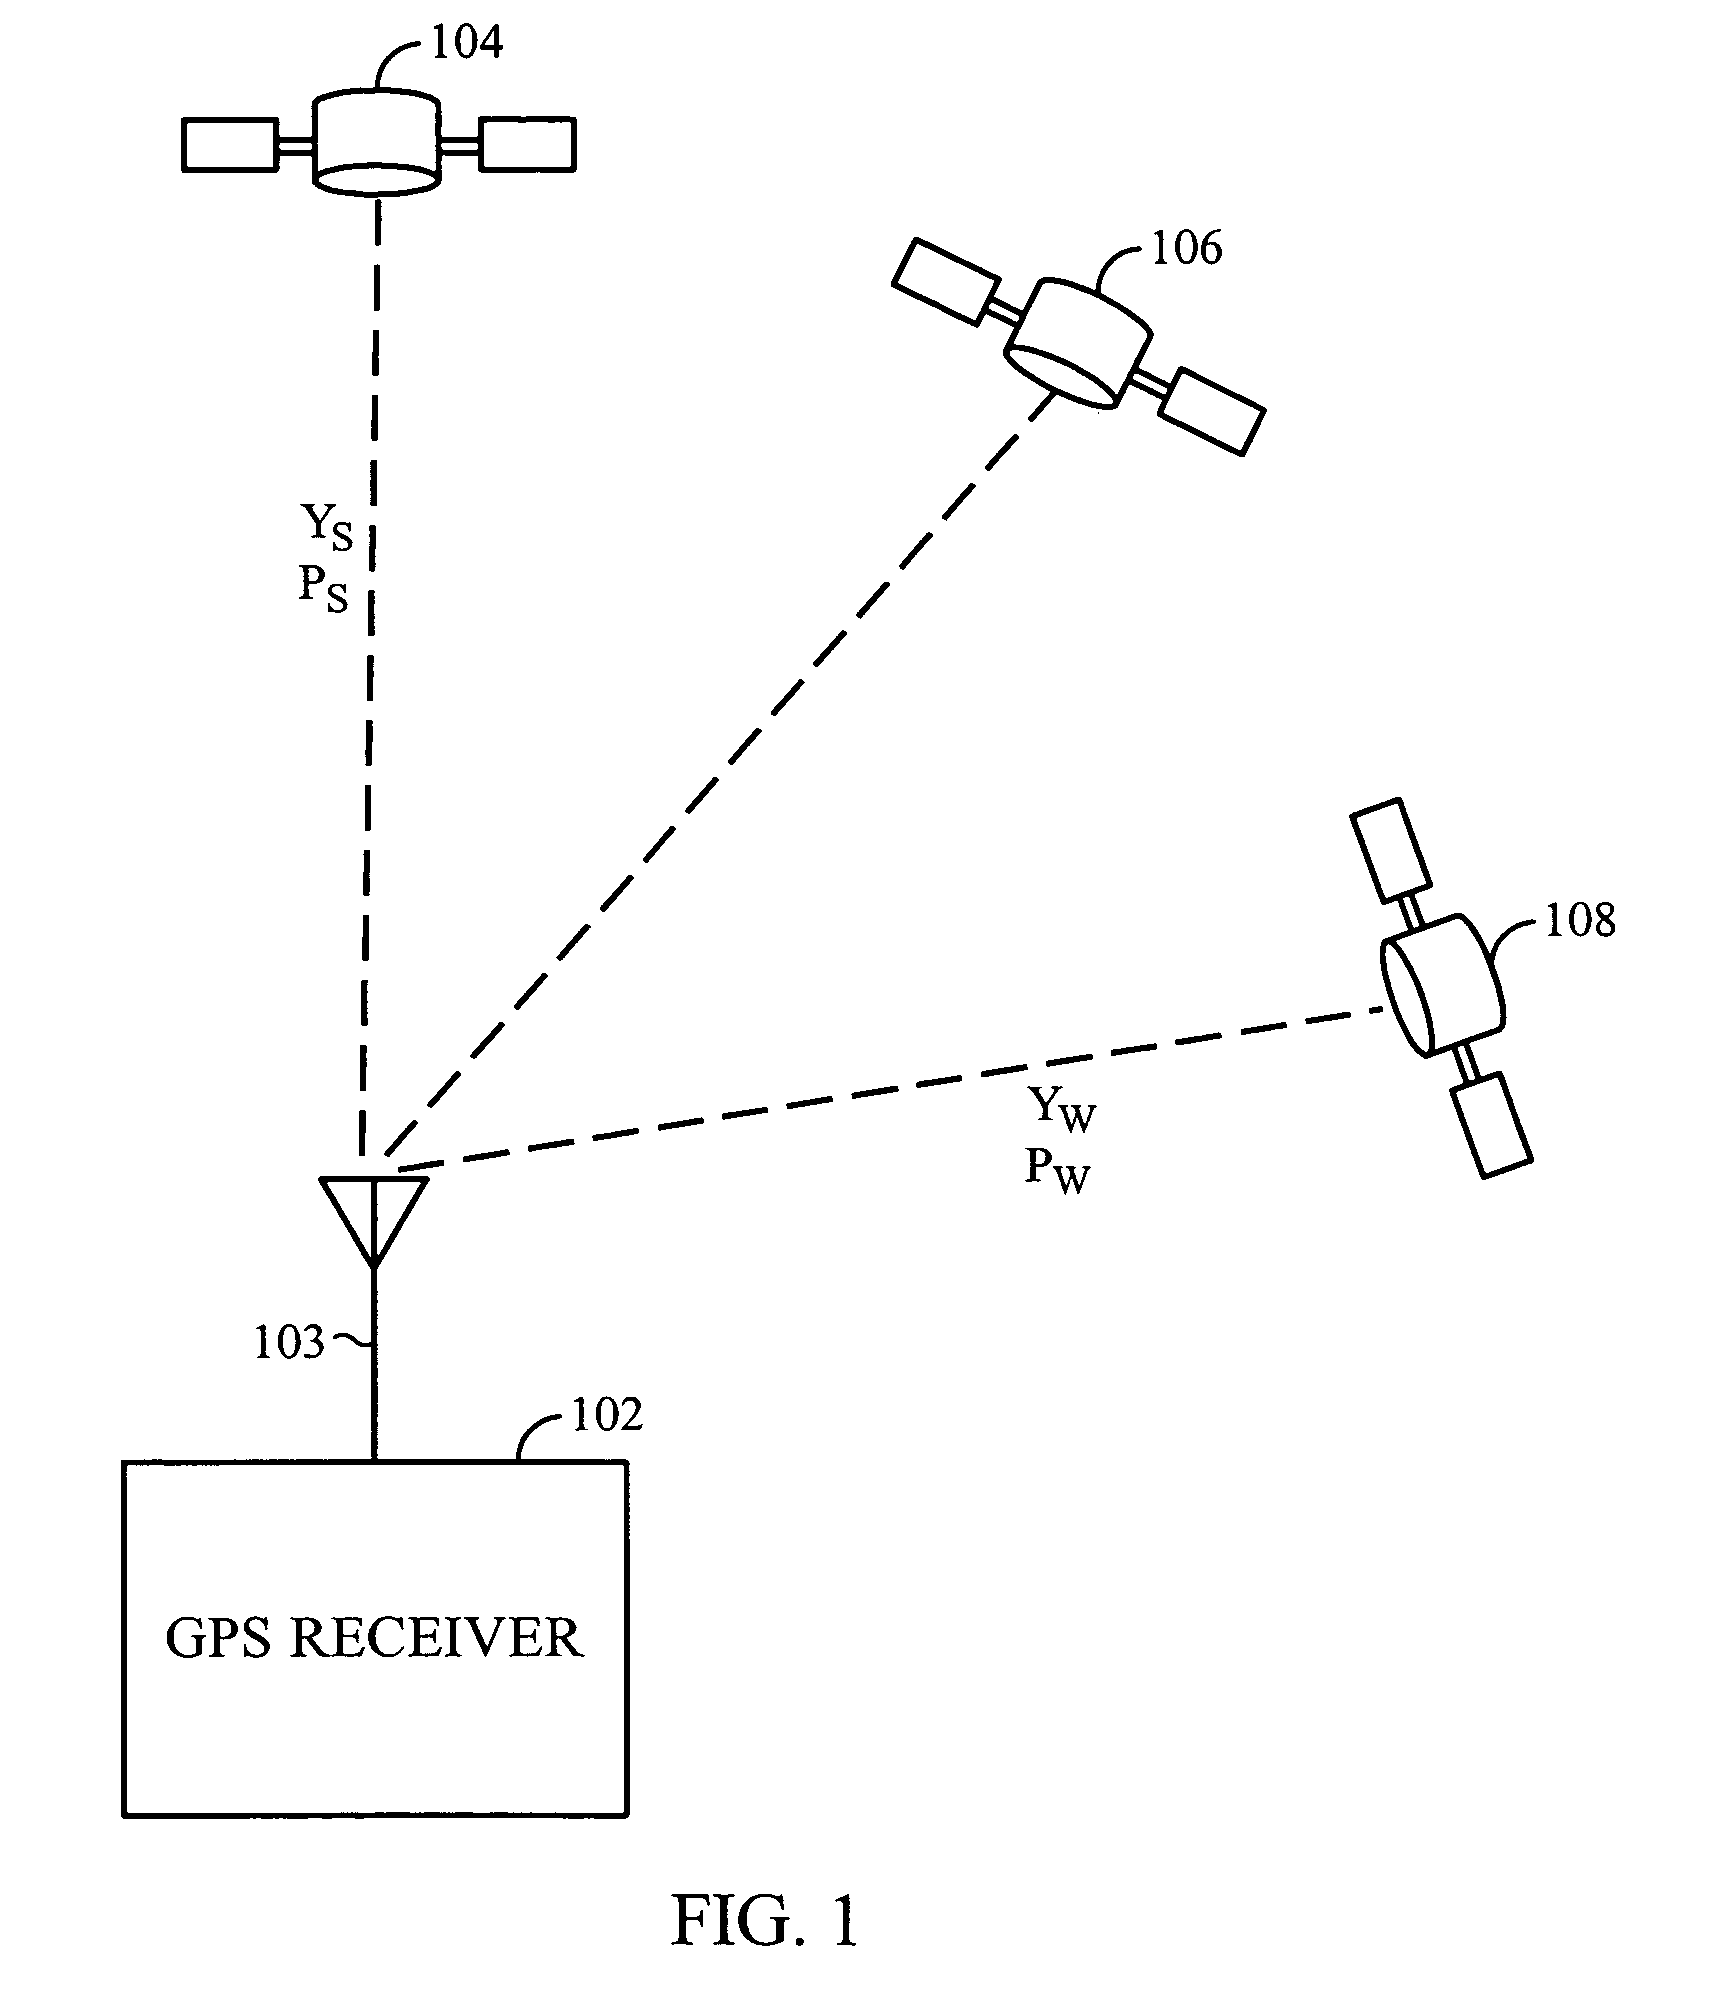 Cross-correlation mitigation method and apparatus for use in a global positioning system receiver